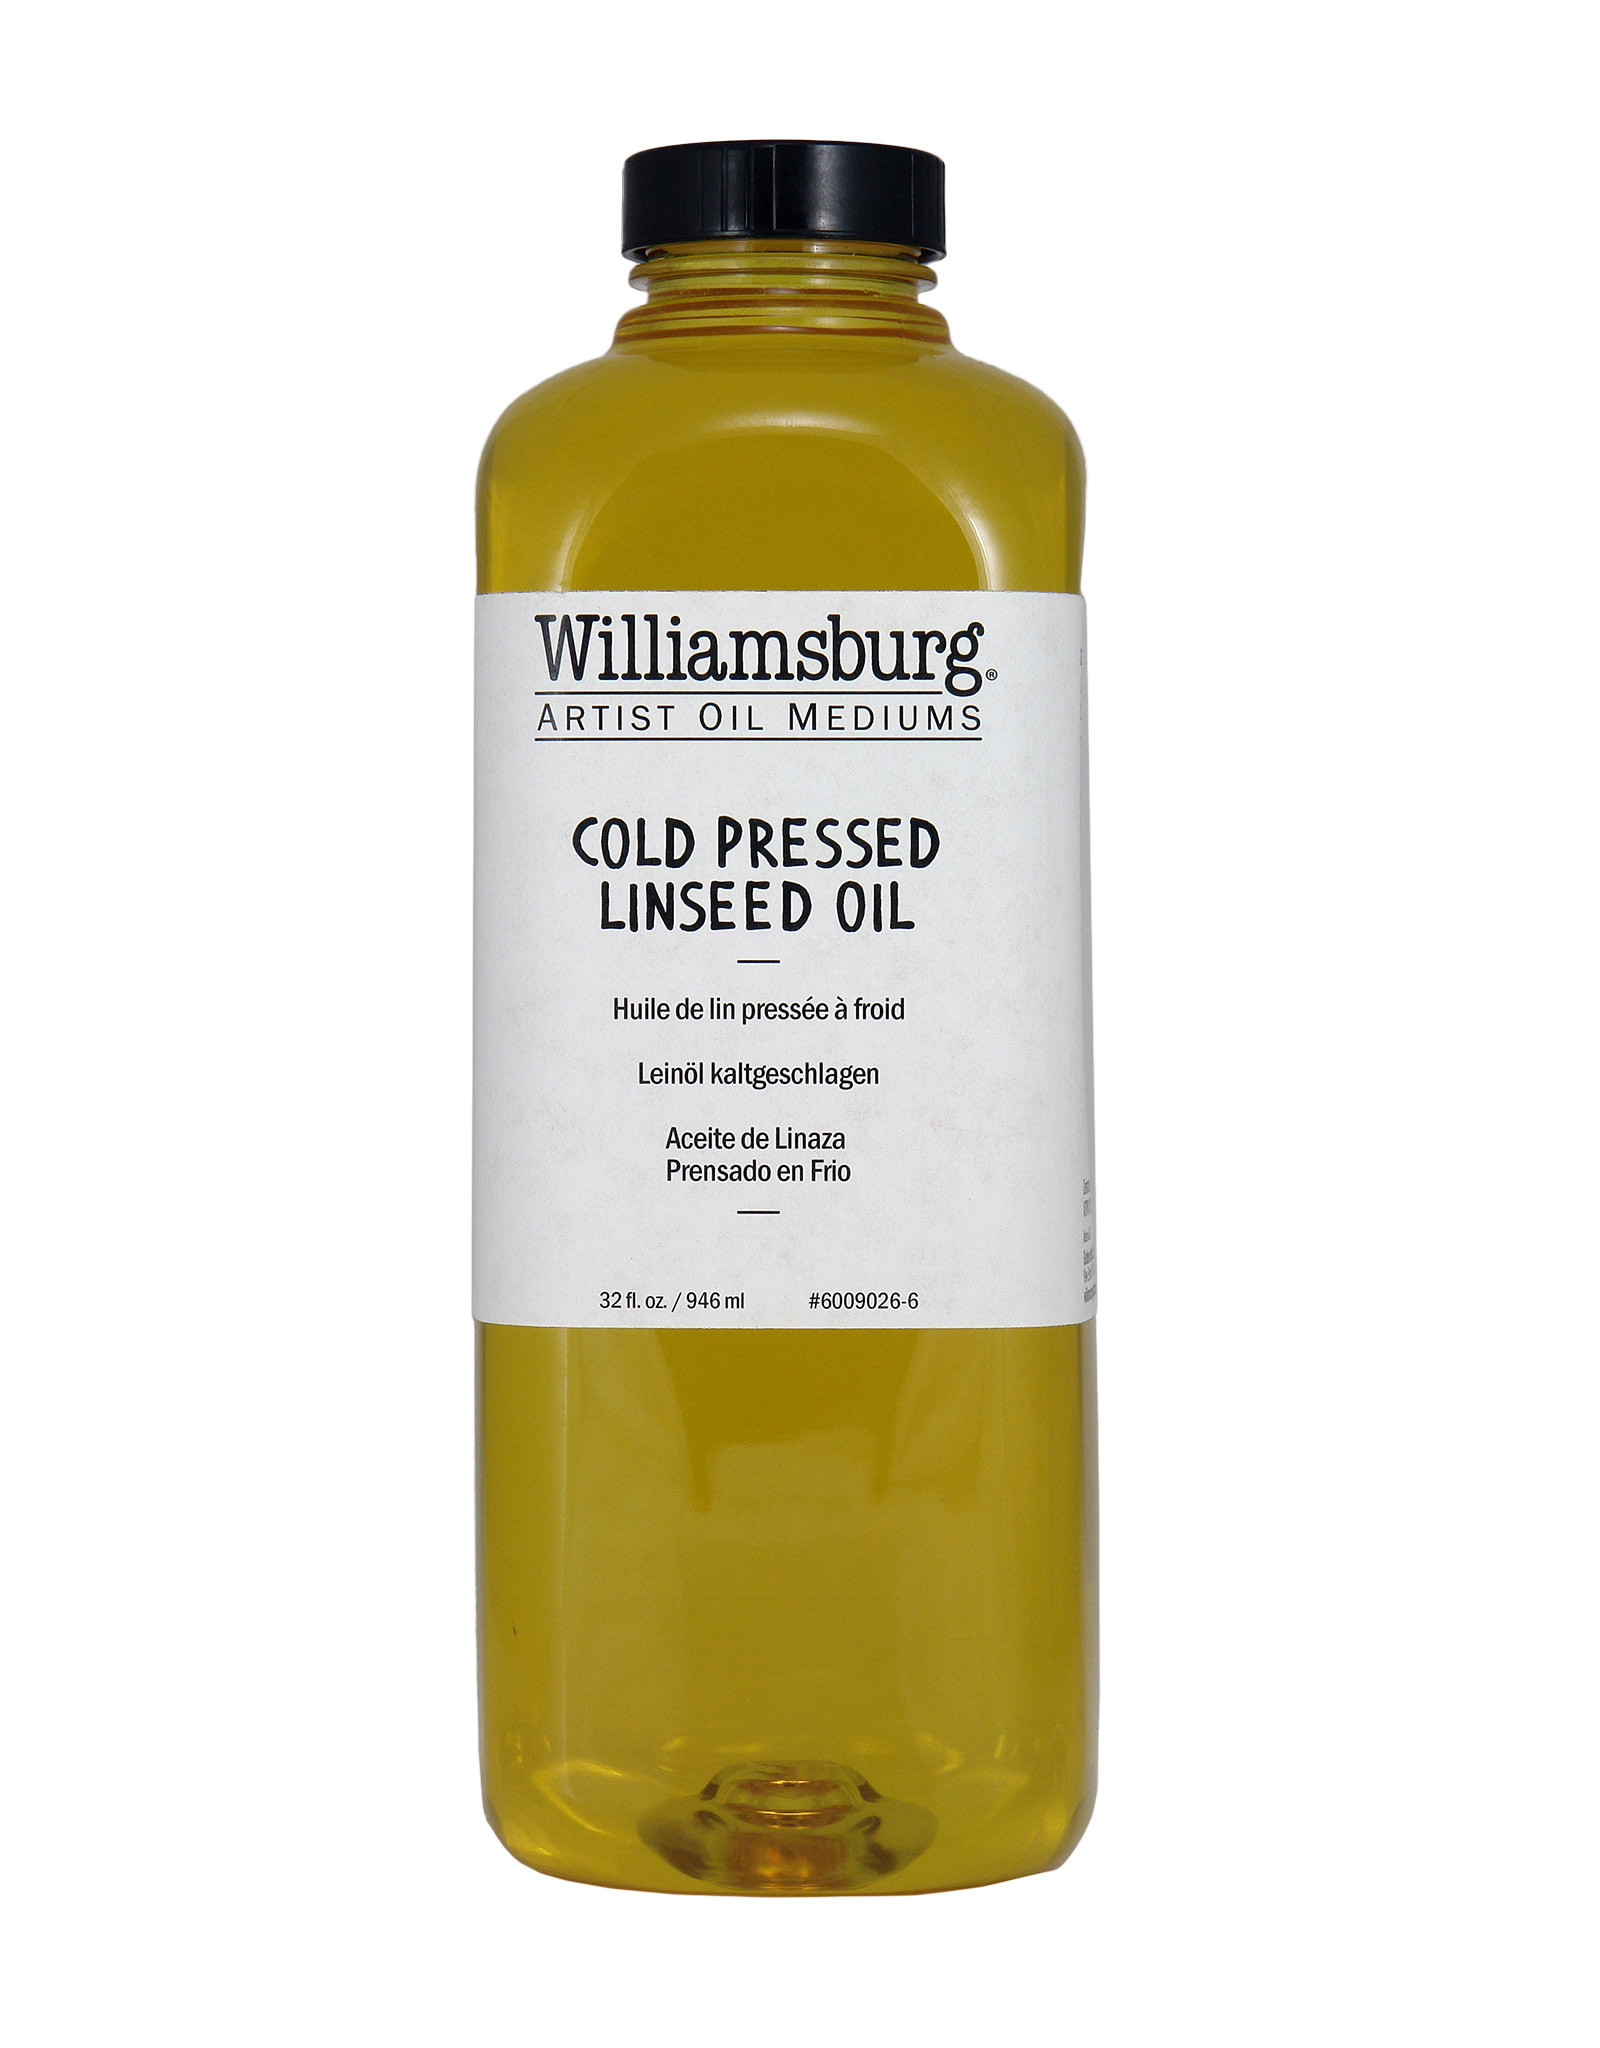 Golden Williamsburg Cold Pressed Linseed Oil 32oz